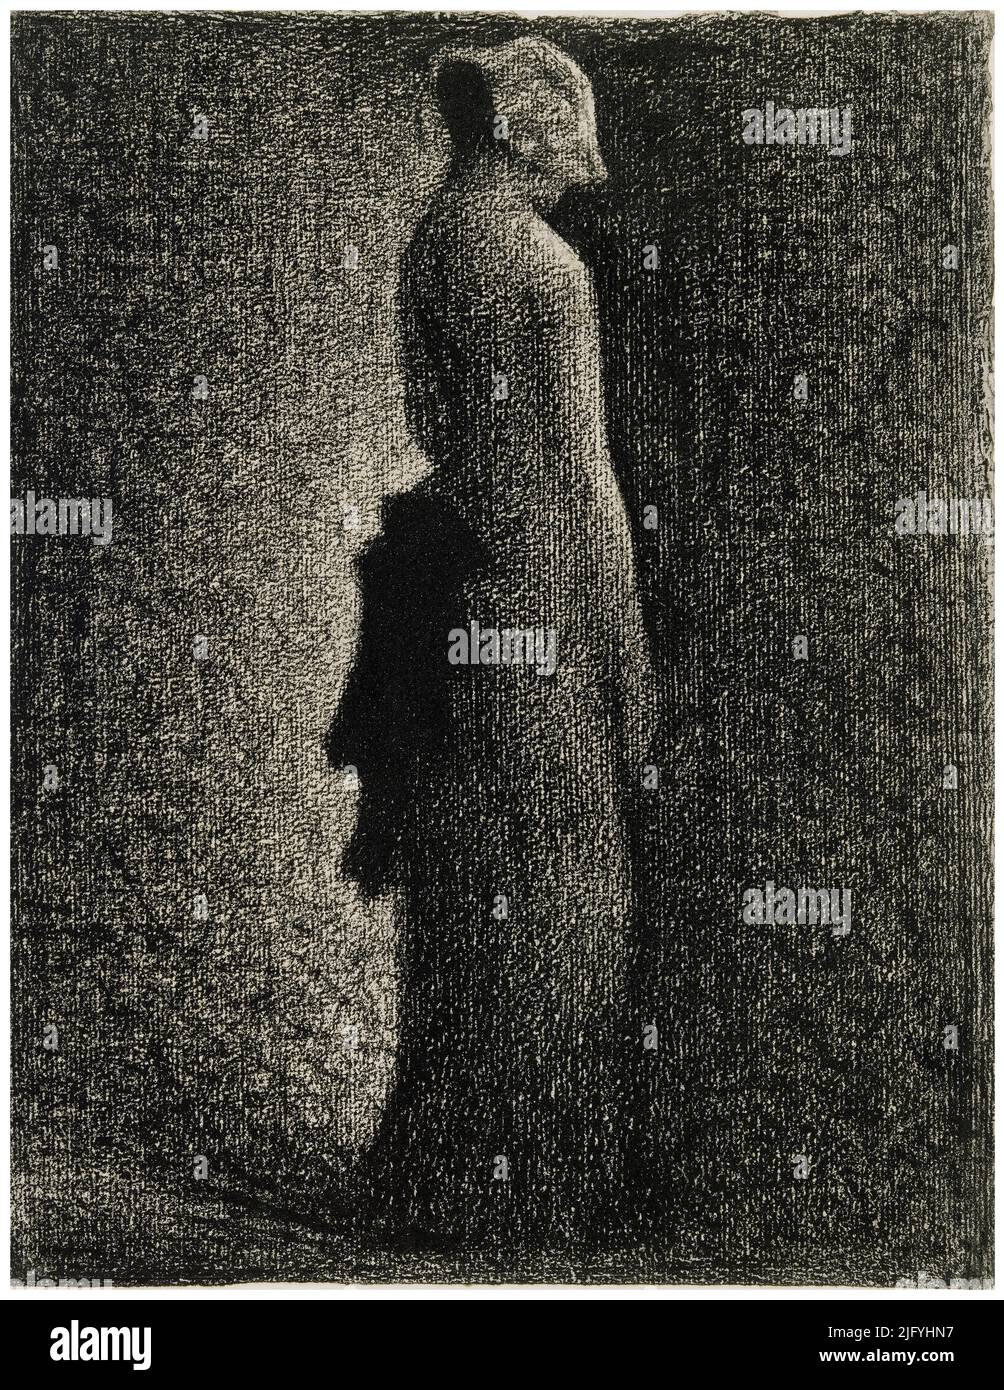 Georges Seurat, The Black Bow, drawing in conte crayon, circa 1882 Stock Photo